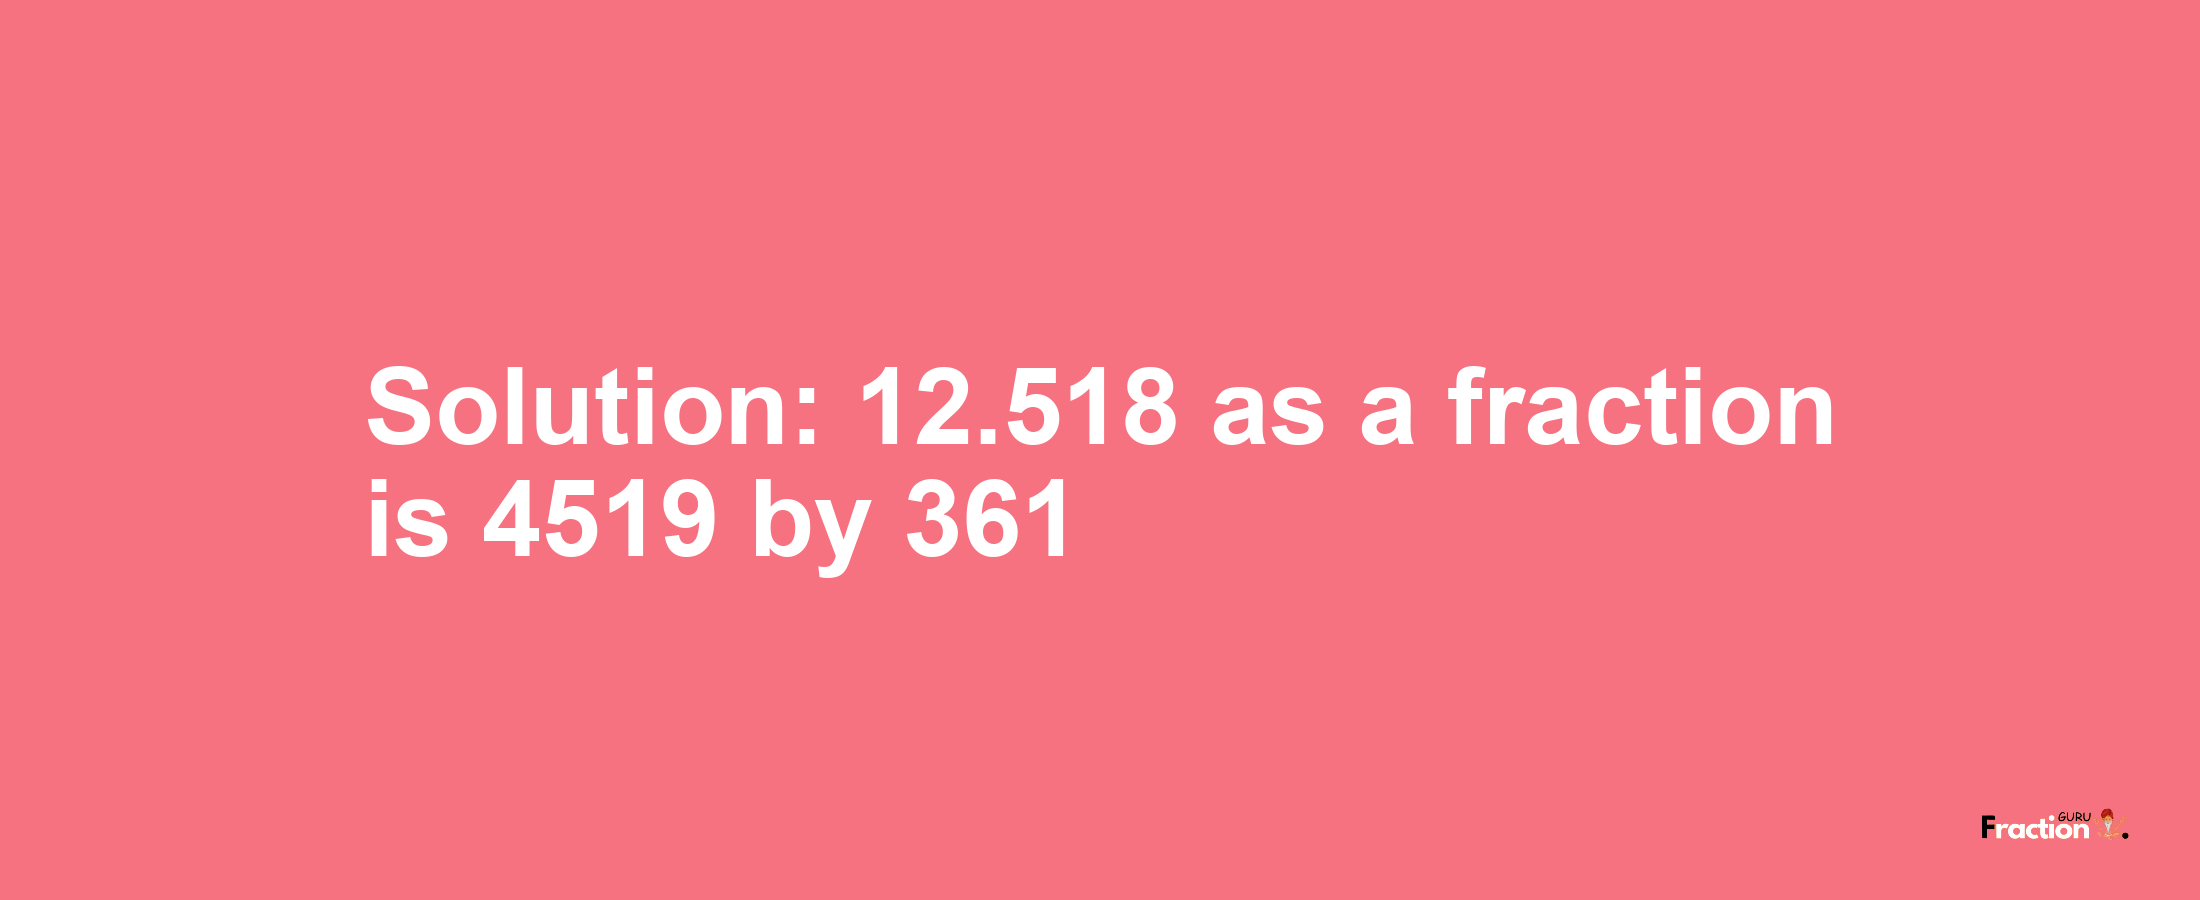 Solution:12.518 as a fraction is 4519/361